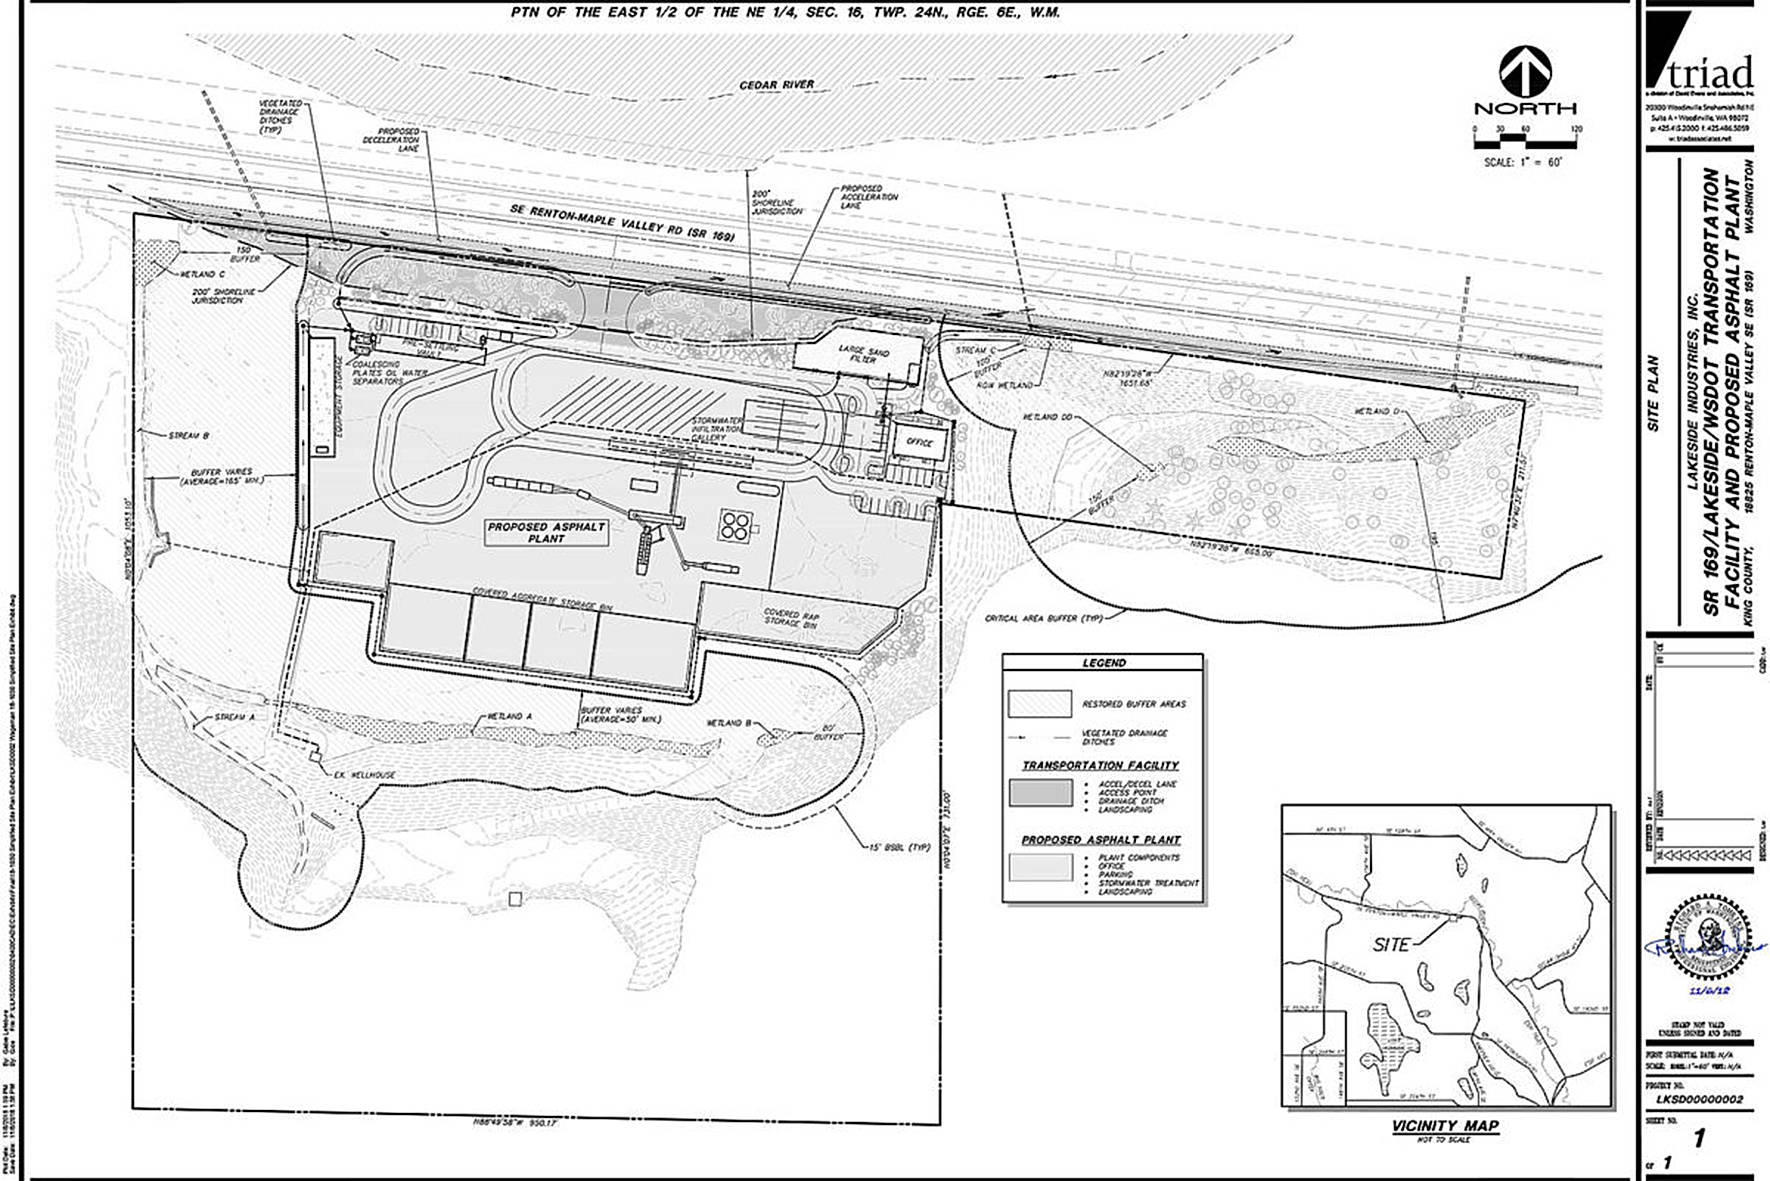 Lakeside’s site plan for the proposed asphalt plant. Submitted photo from Lakeside Industries